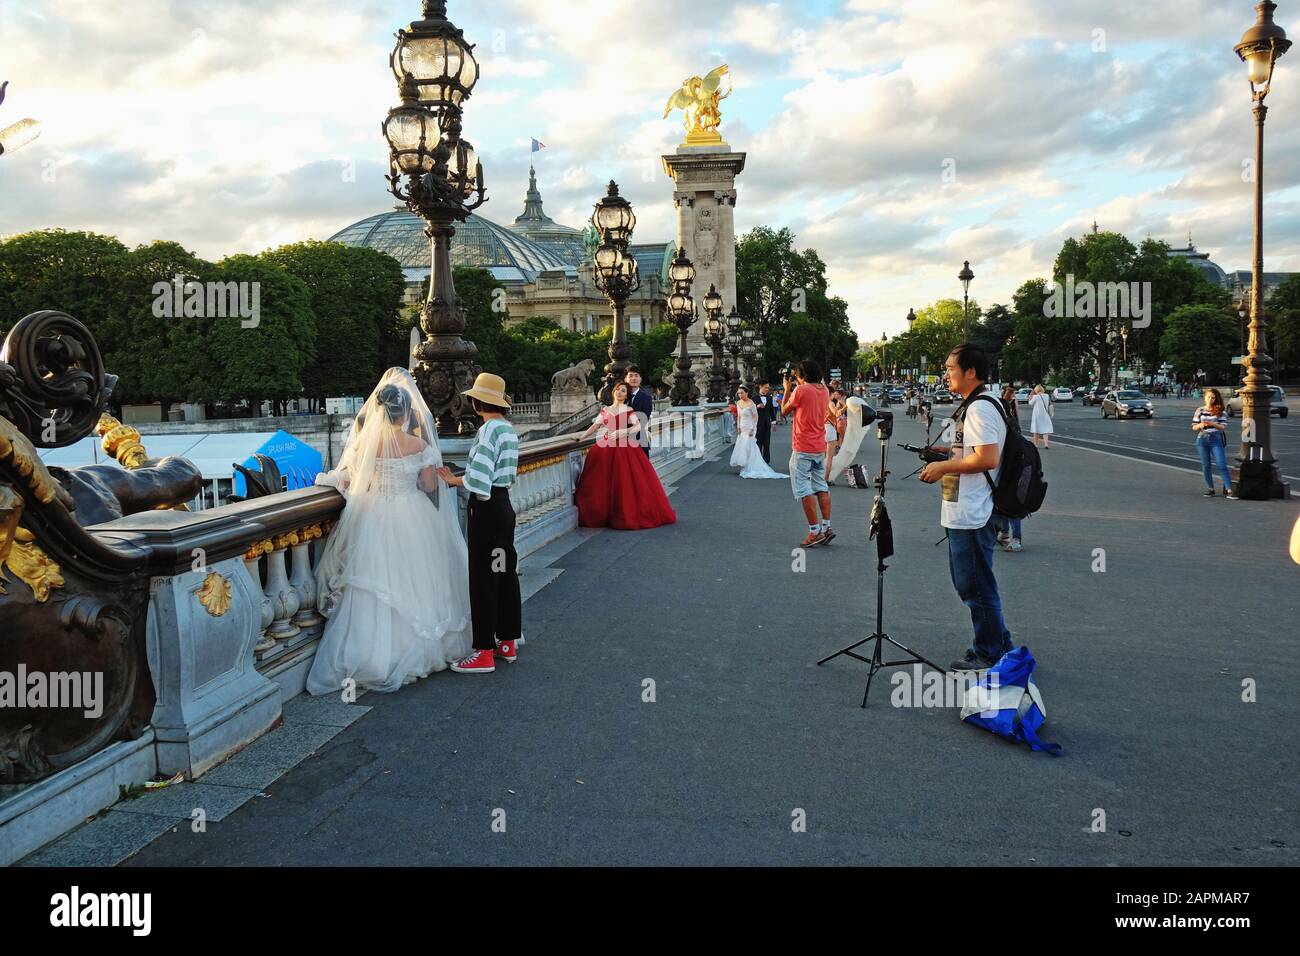 Brides, photographers, an ornate bridge, wedding dresses white or red with gold statues and art nouveau lamps, Pont Alexandre III, Paris; France Stock Photo